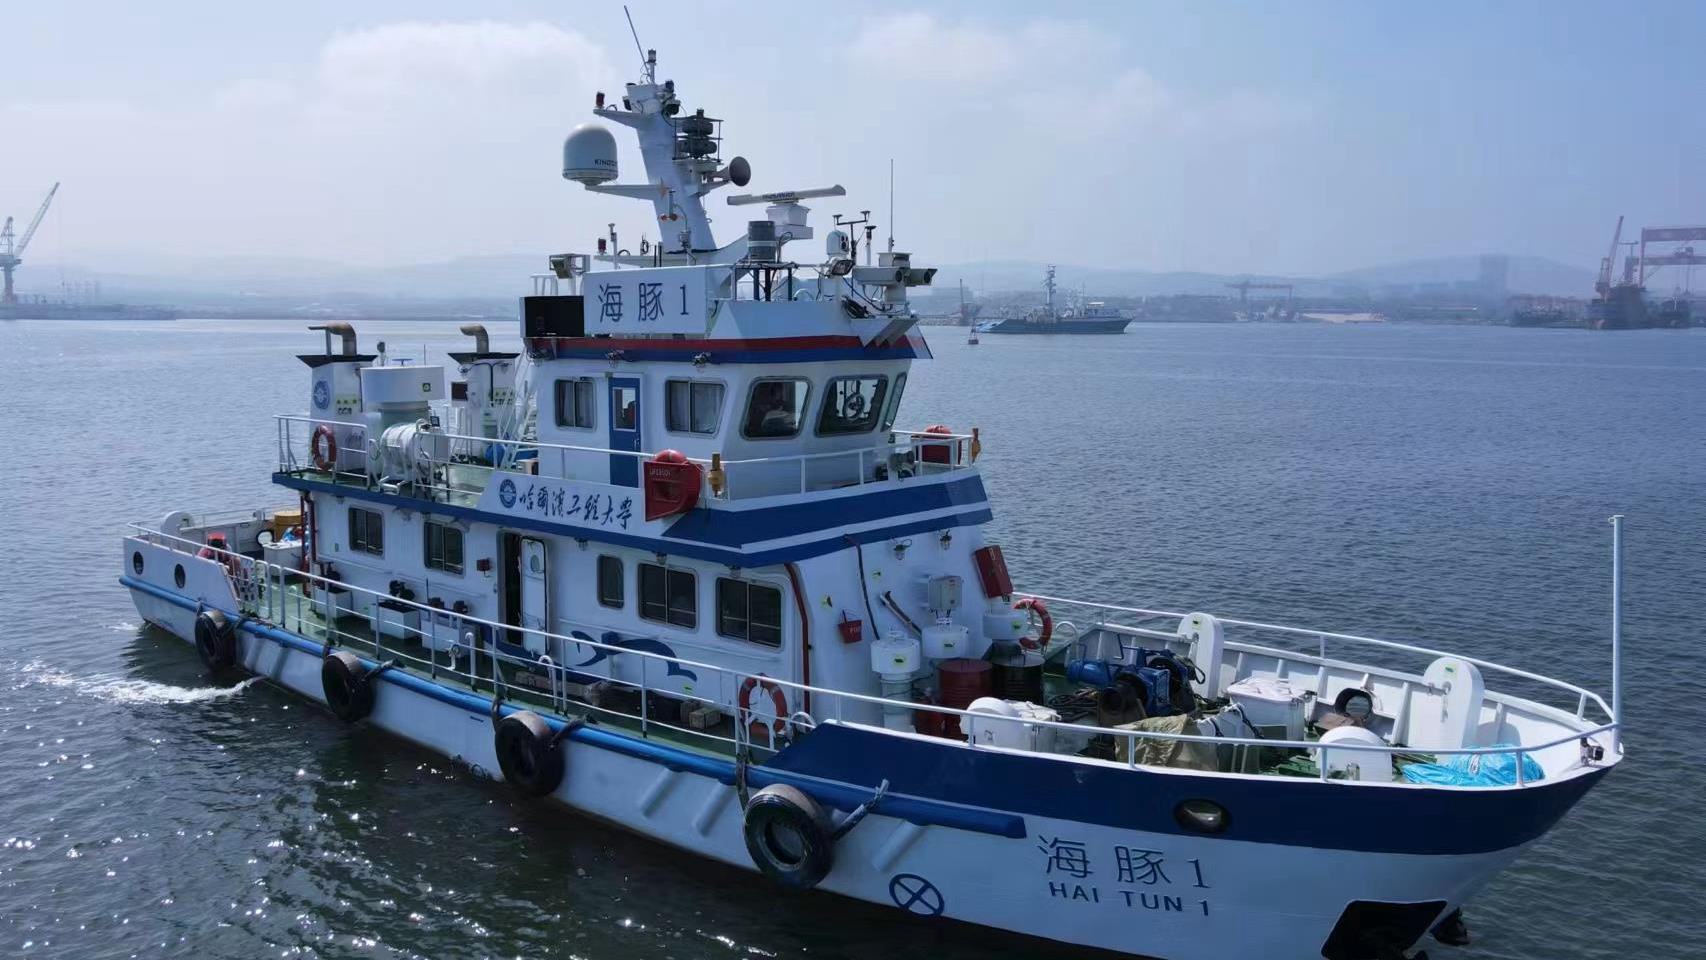 Haitun 1, China's first intelligent research experimental ship equipped with digital twin technology. /China Media Group